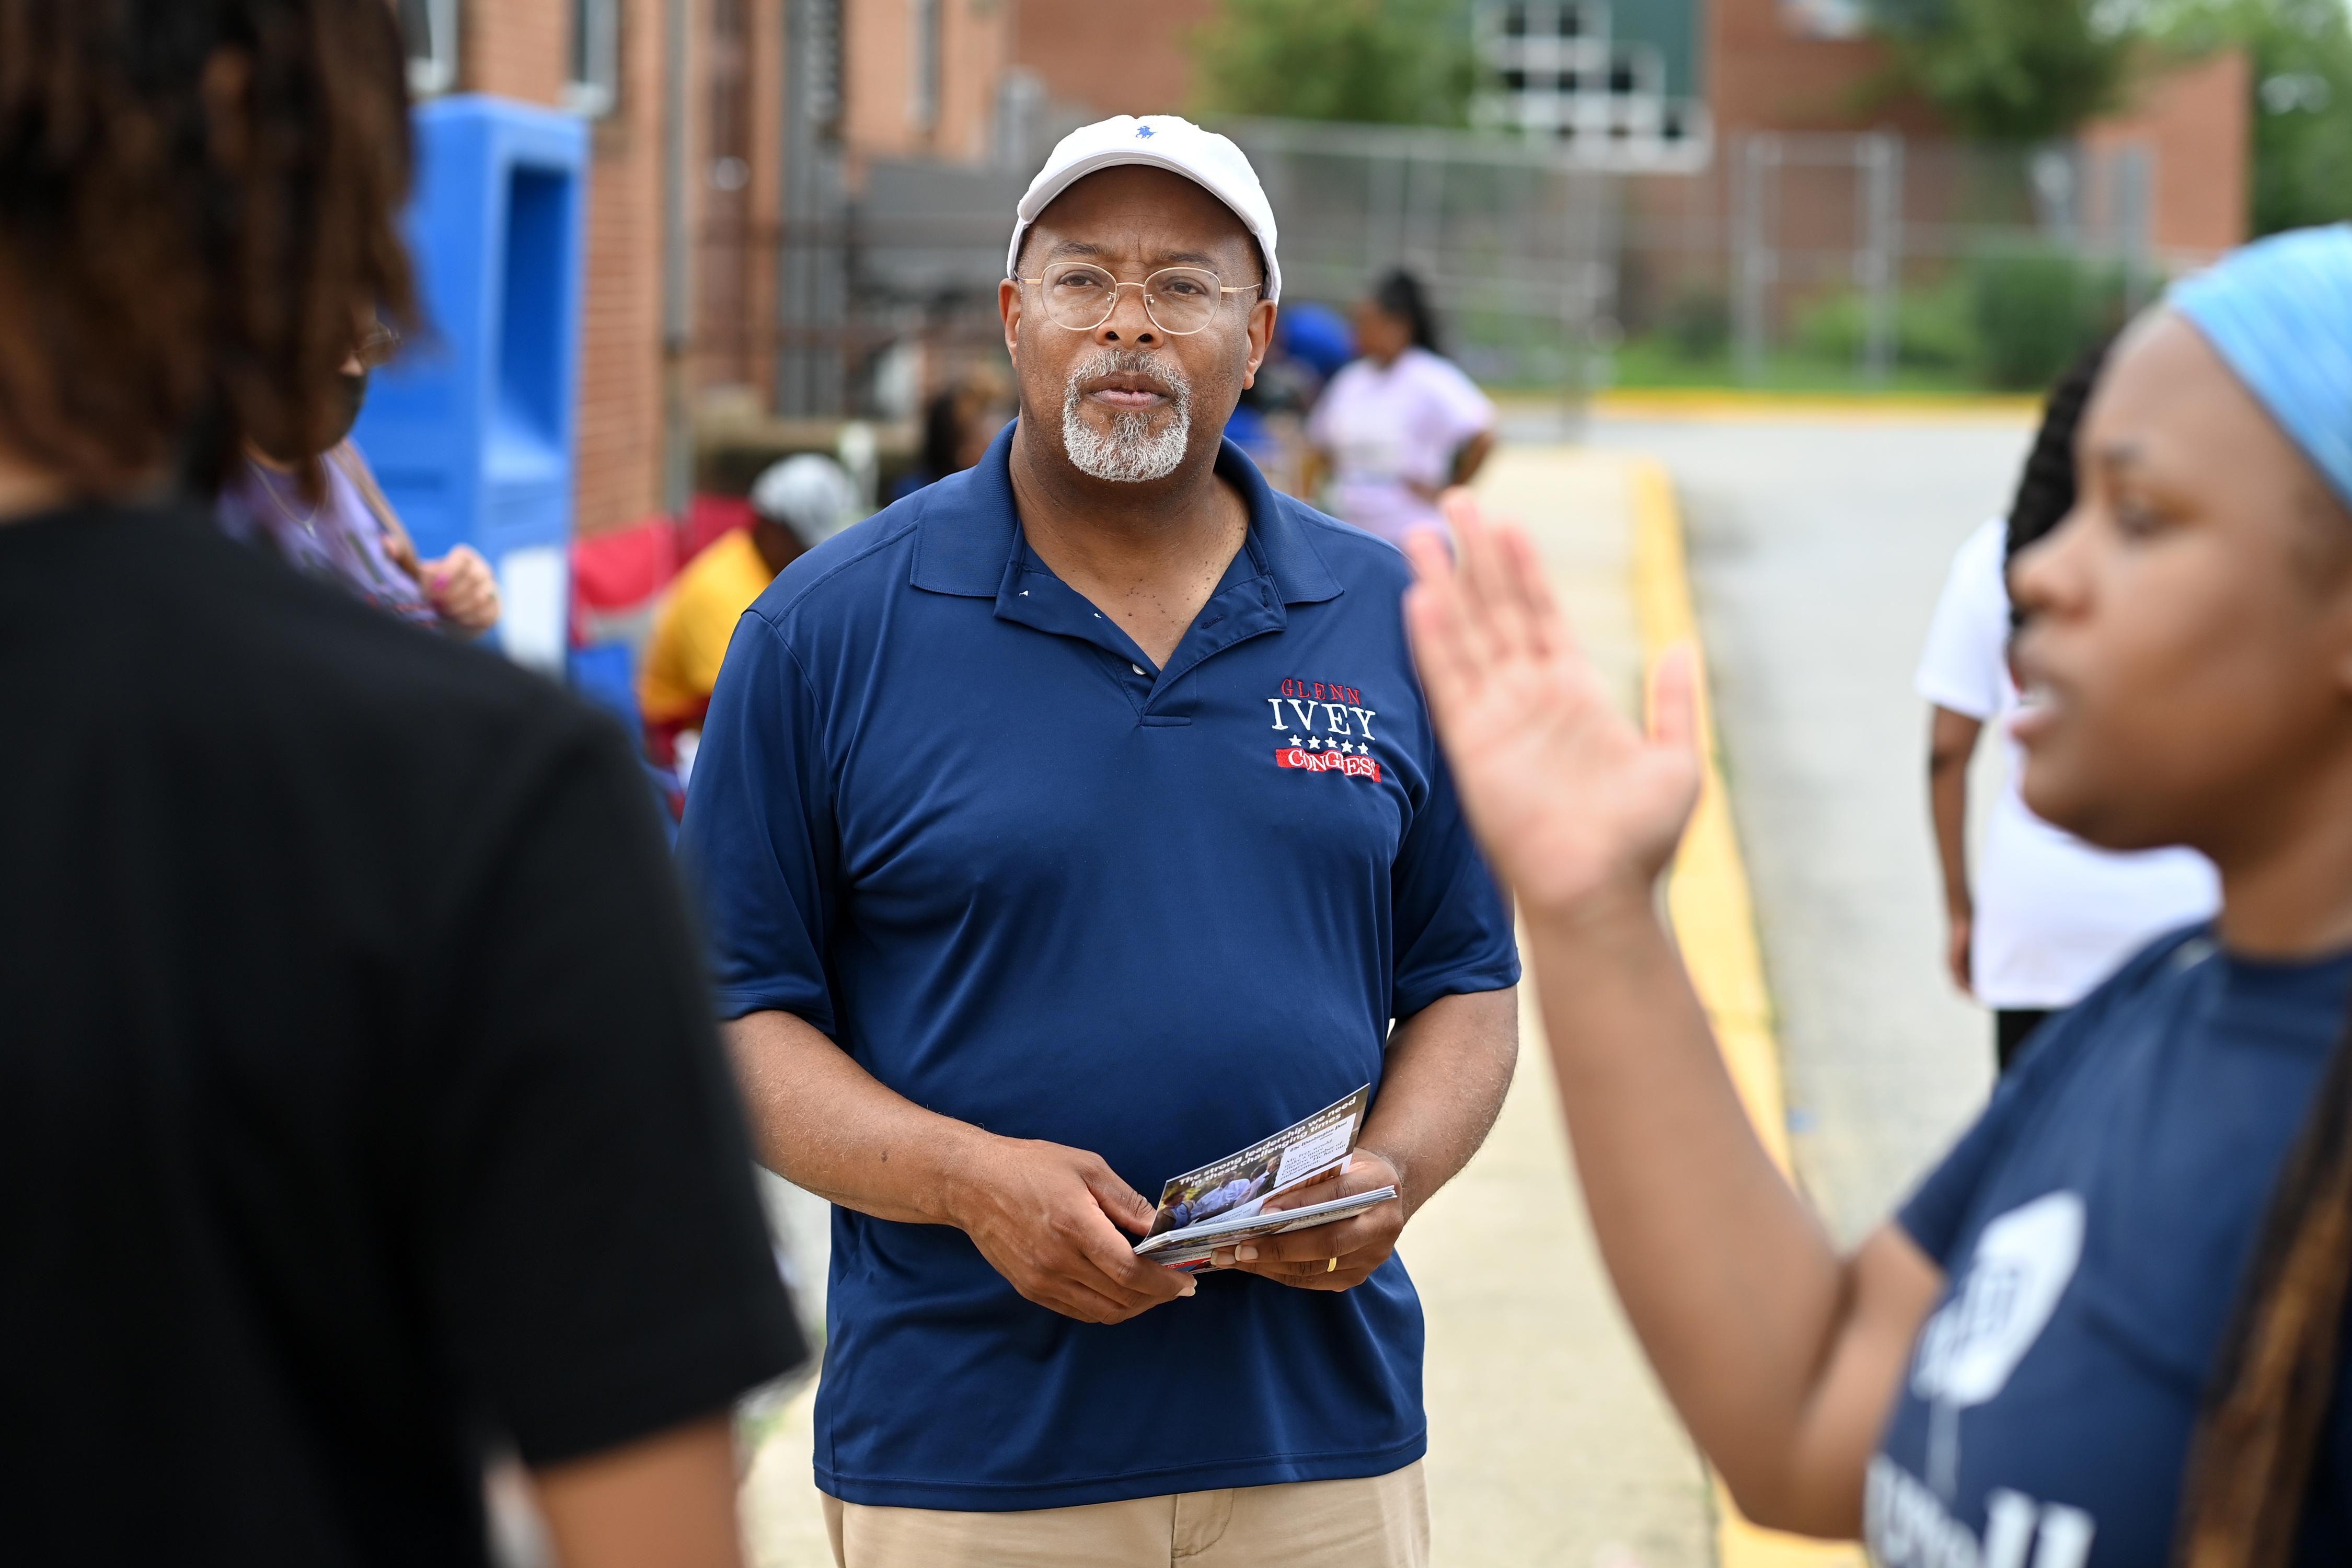 Democratic congressional candidate Glenn Ivey waits to greet a voter at Surrattsville High School on July 19, 2022 in Clinton, Maryland. 